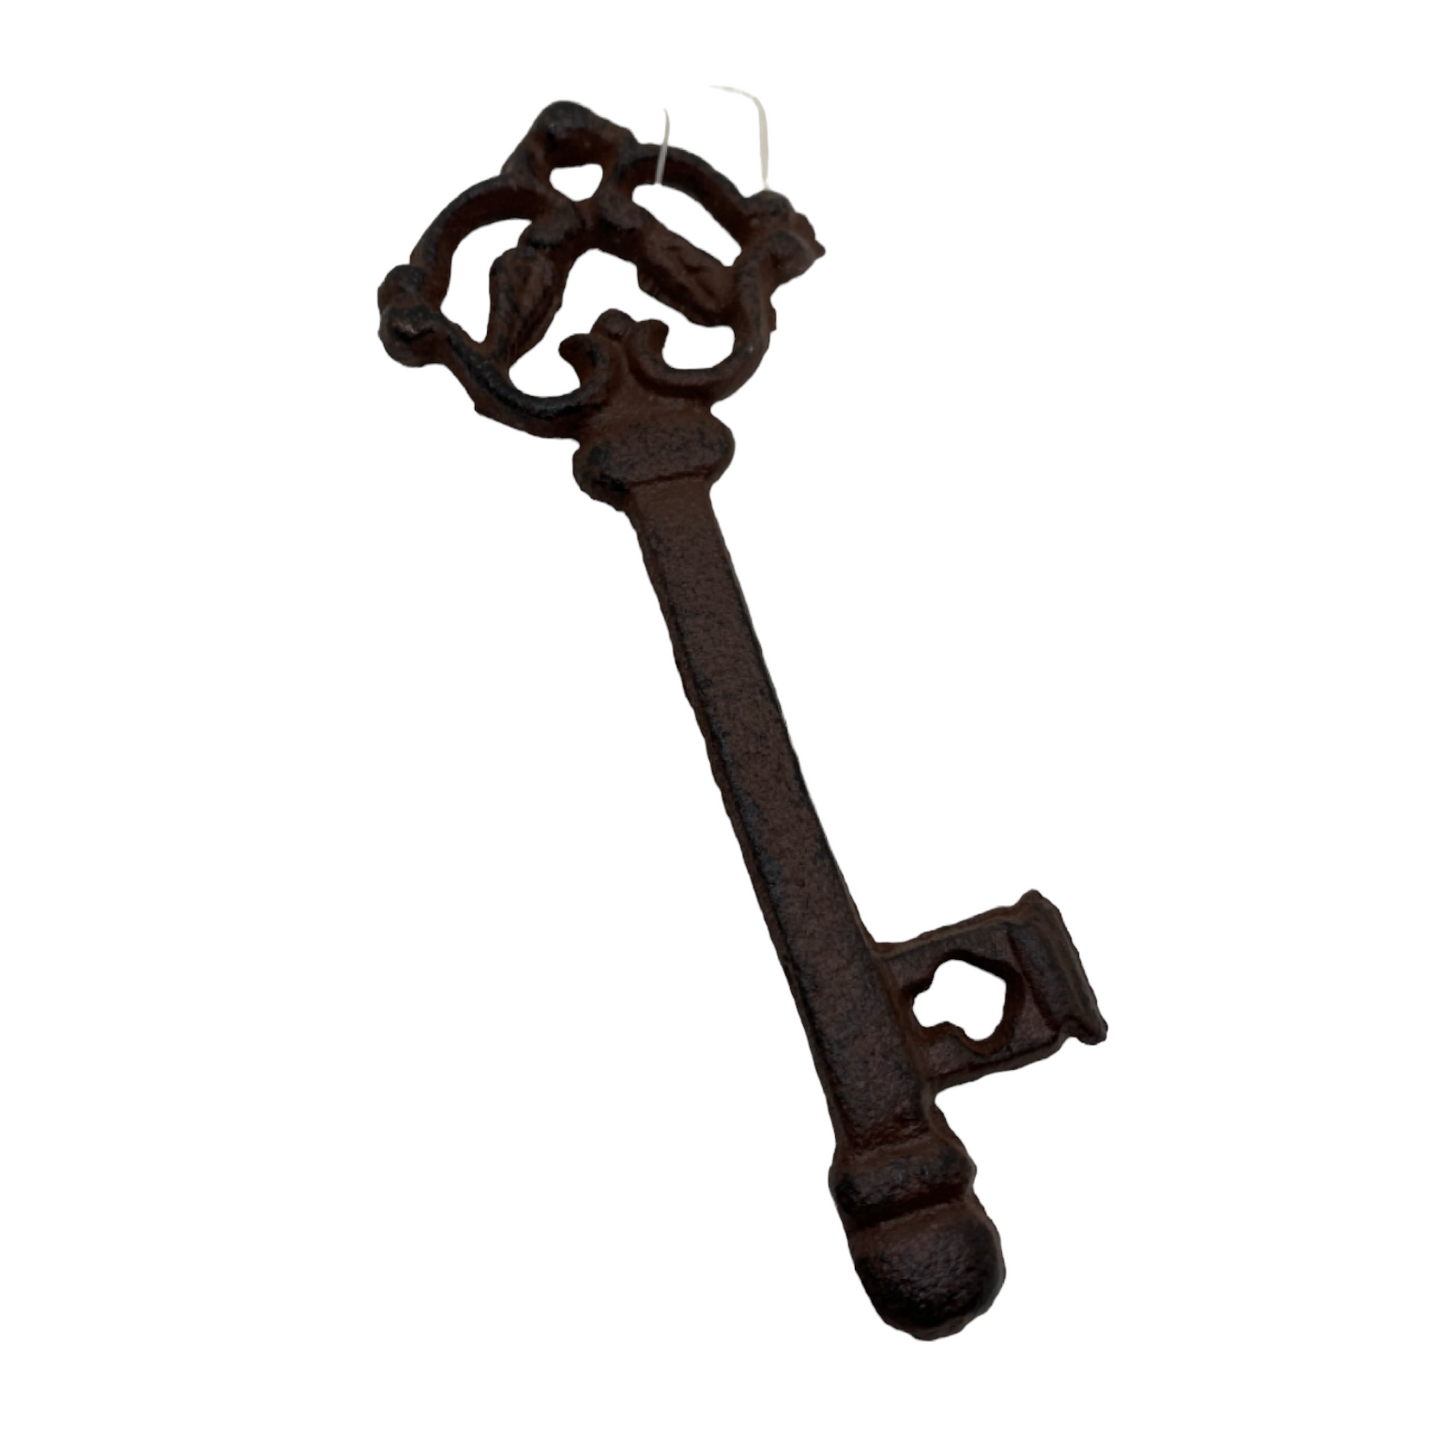 Key Antique Rustic Cast Iron - The Renmy Store Homewares & Gifts 